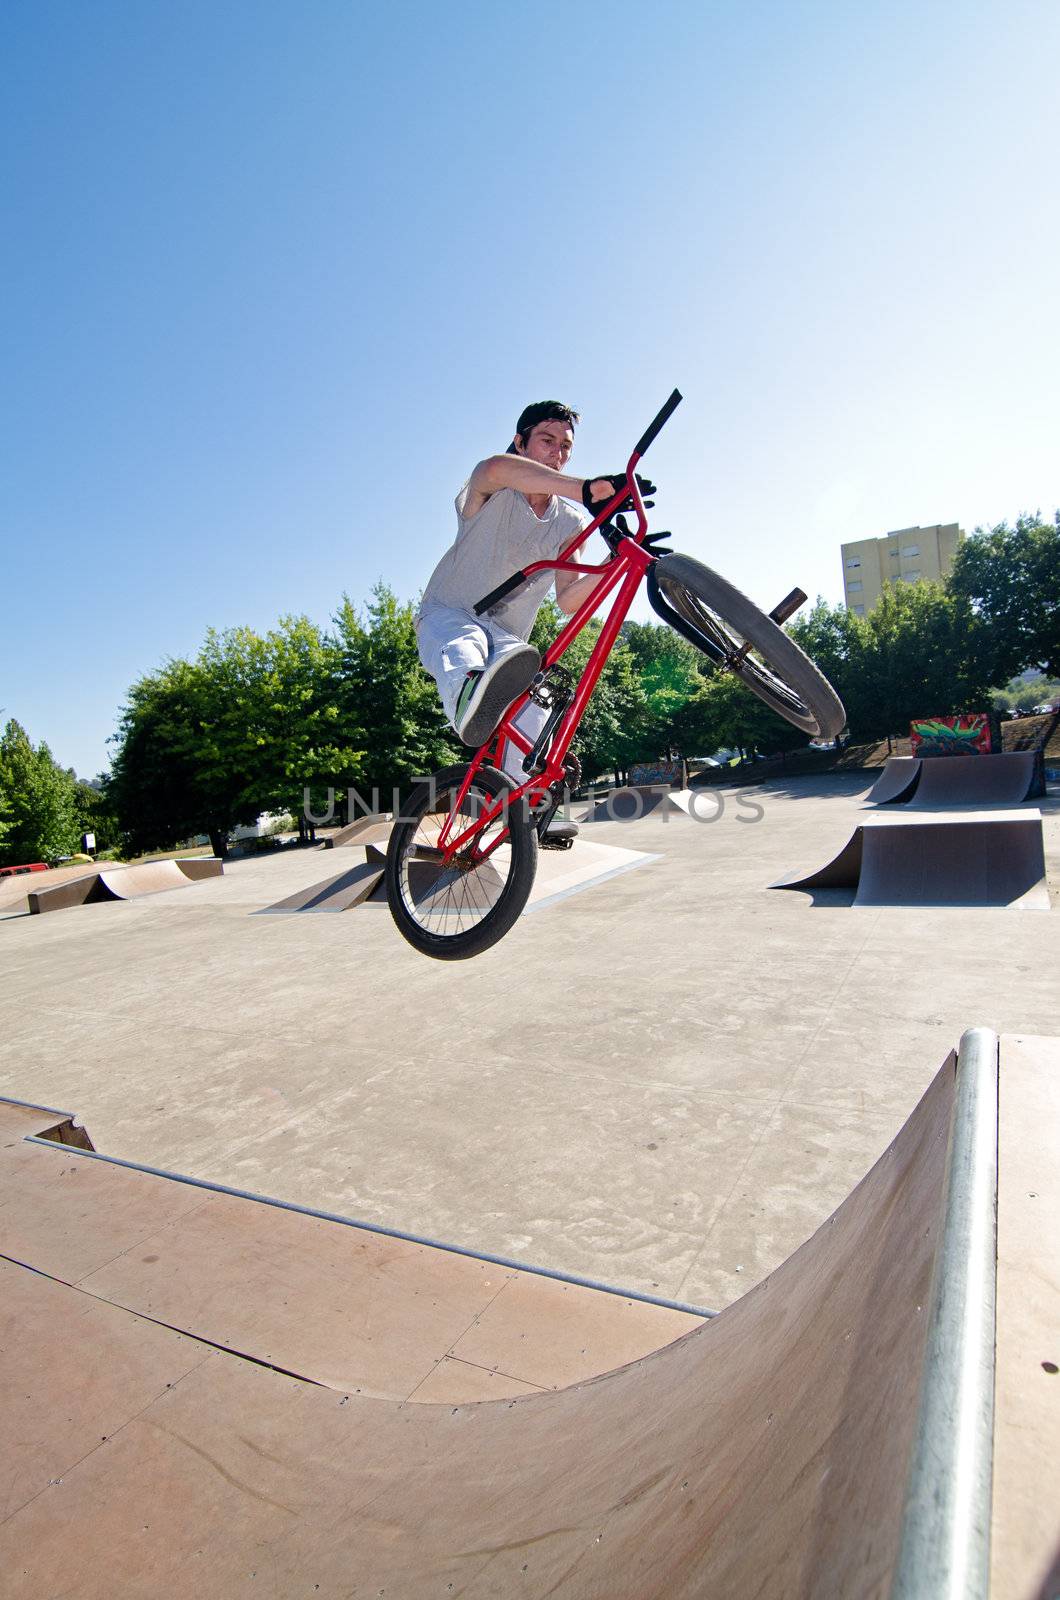 Bmx rider performing a bar spin to a quater pipe ramp on a skatepark.